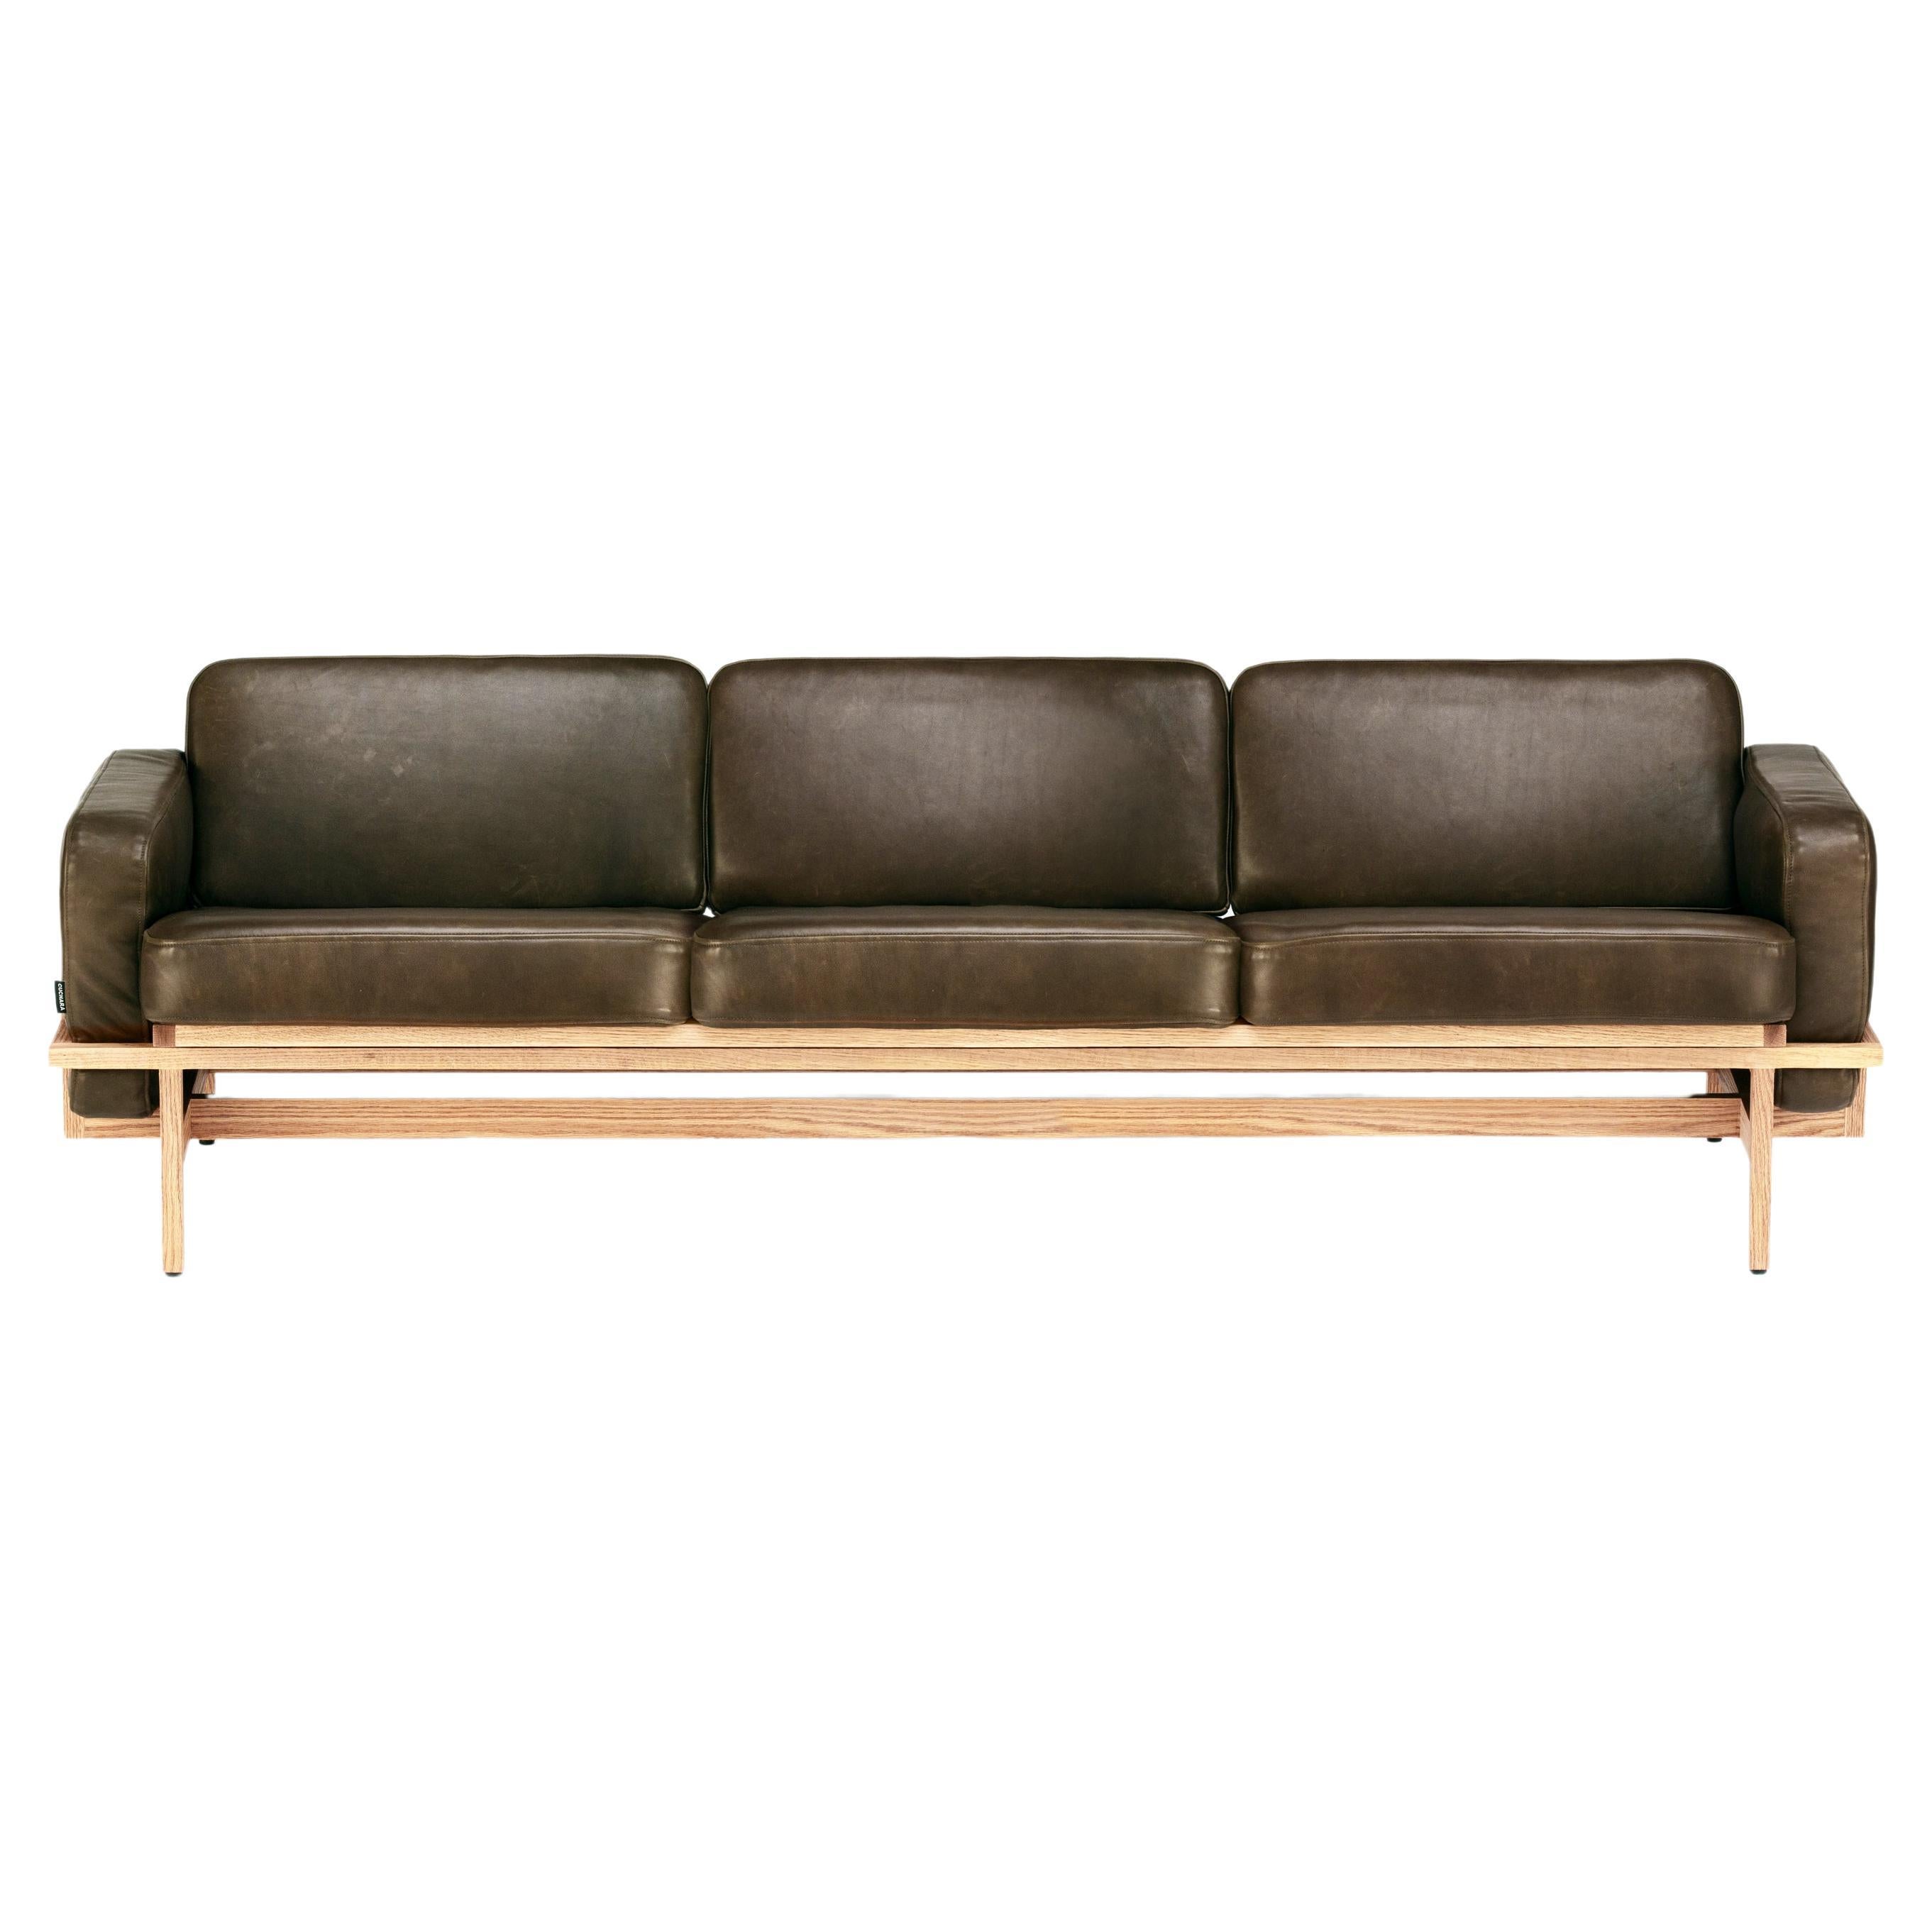 Tres Plazas Lccc, Mexican Contemporary Sofa by Emiliano Molina for Cuchara For Sale